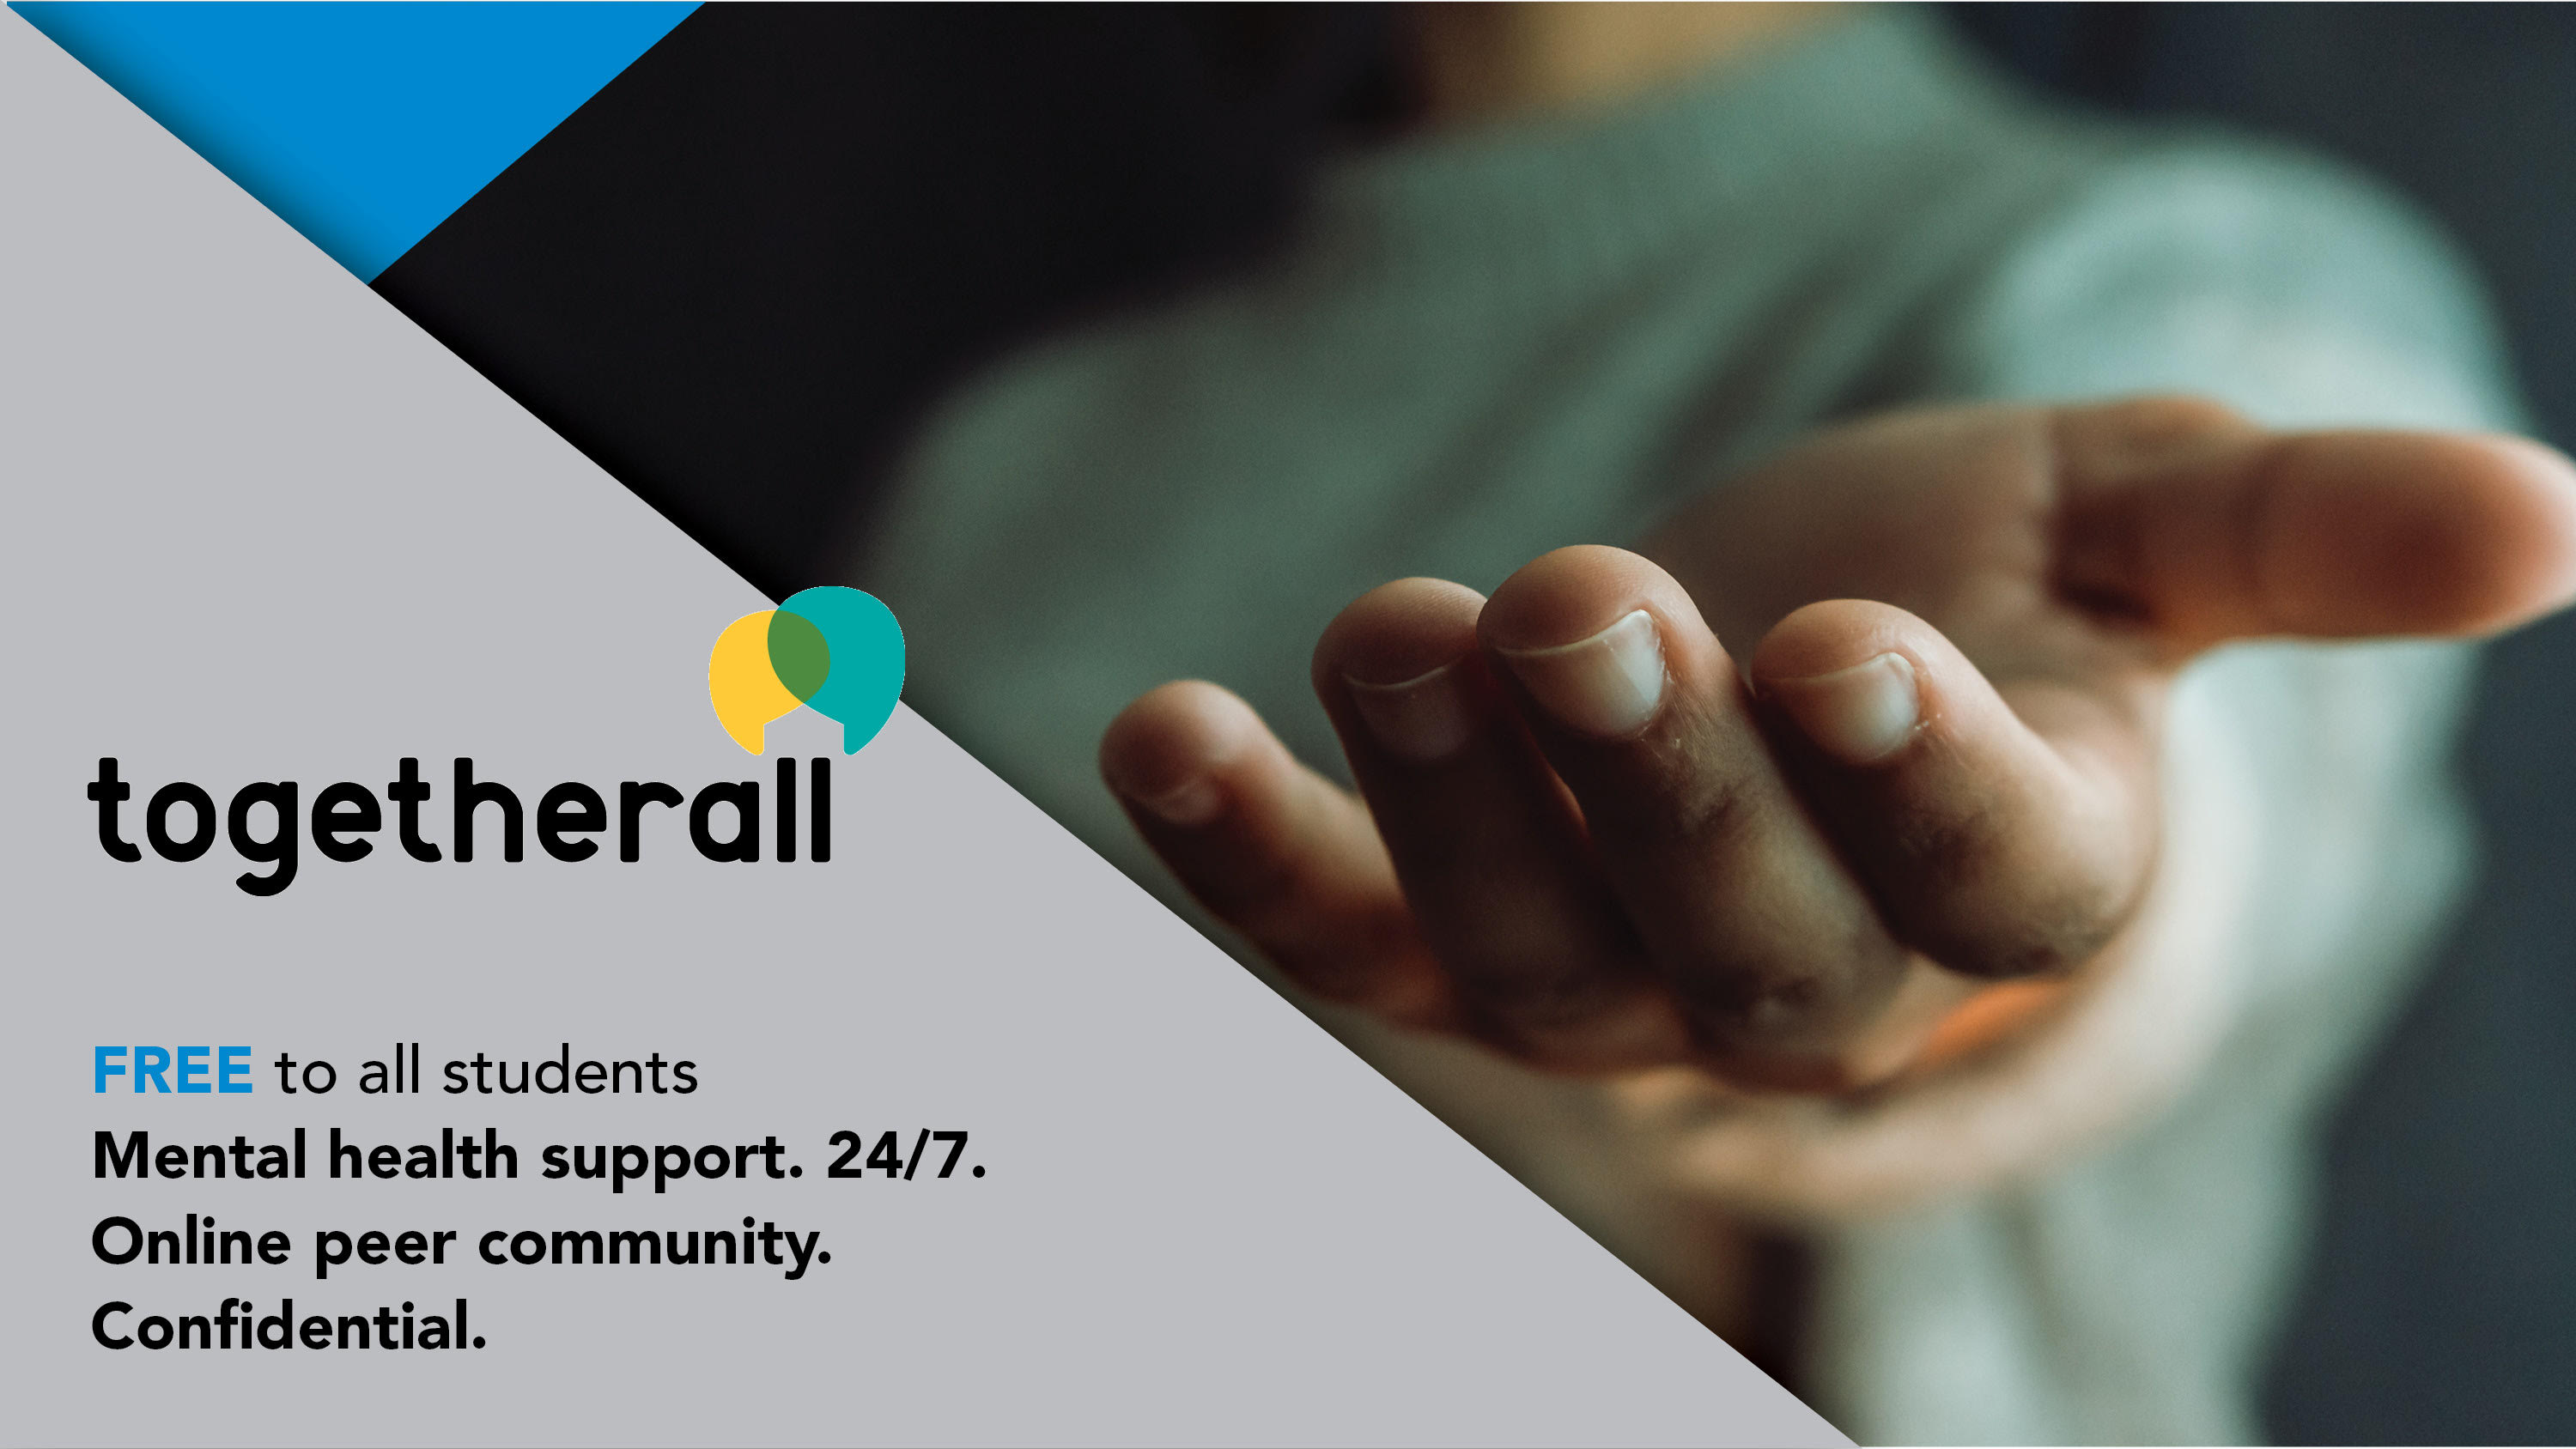 Togetherall. Free to all students. Mental health support. 24/7. Online peer community. Confidential.